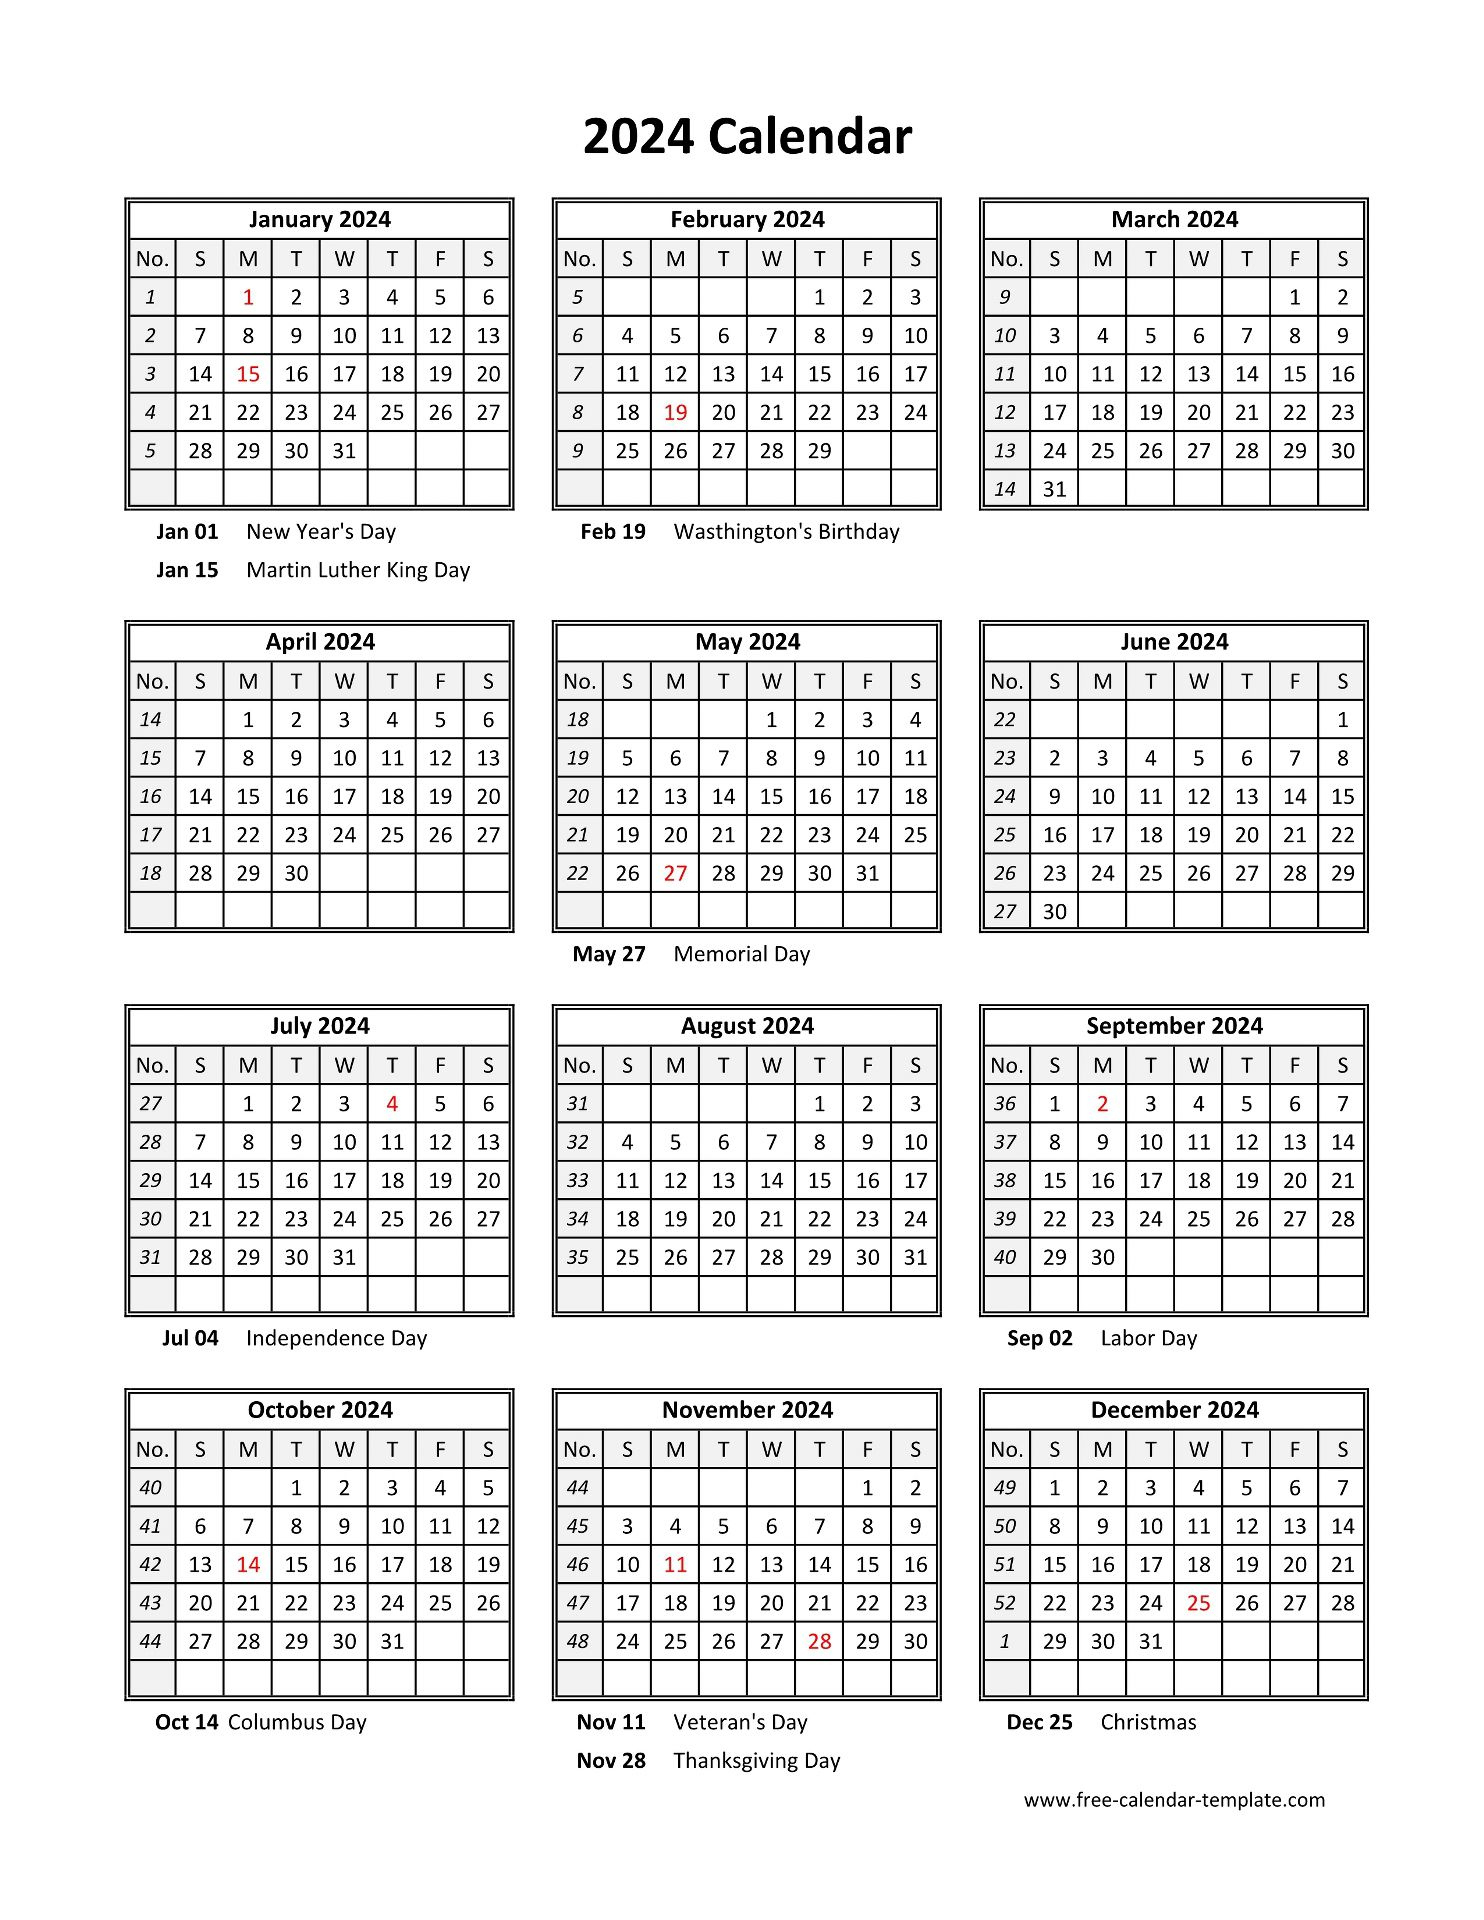 Yearly Printable Calendar 2024 With Holidays | Free-Calendar | Printable Calendar 2024 Free Pdf